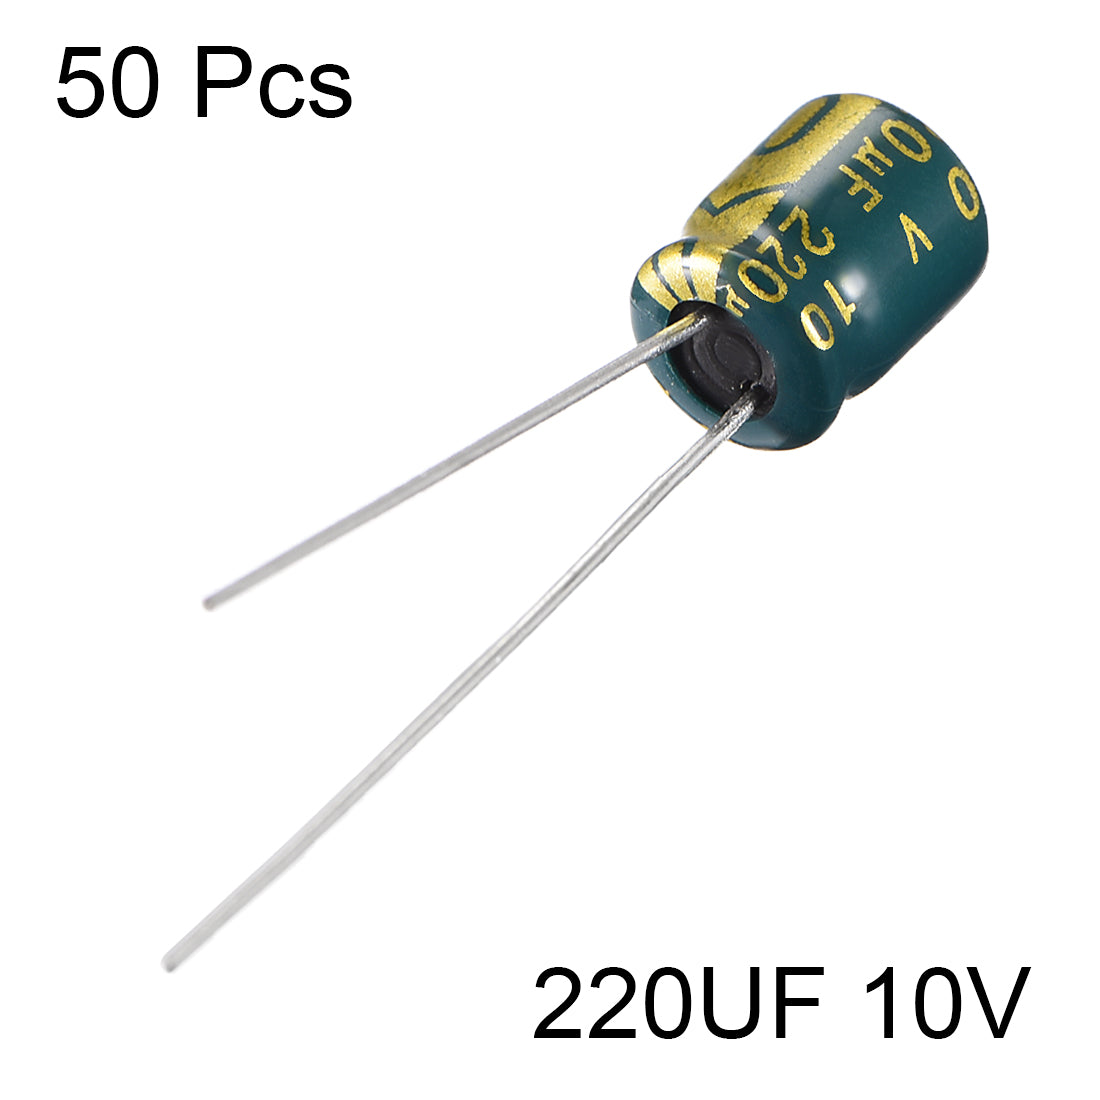 uxcell Uxcell Aluminum Radial Electrolytic Capacitor Low ESR Green with 220UF 10V 105 Celsius Life 3000H 6 x 8 mm High Ripple Current,Low Impedance 50pcs